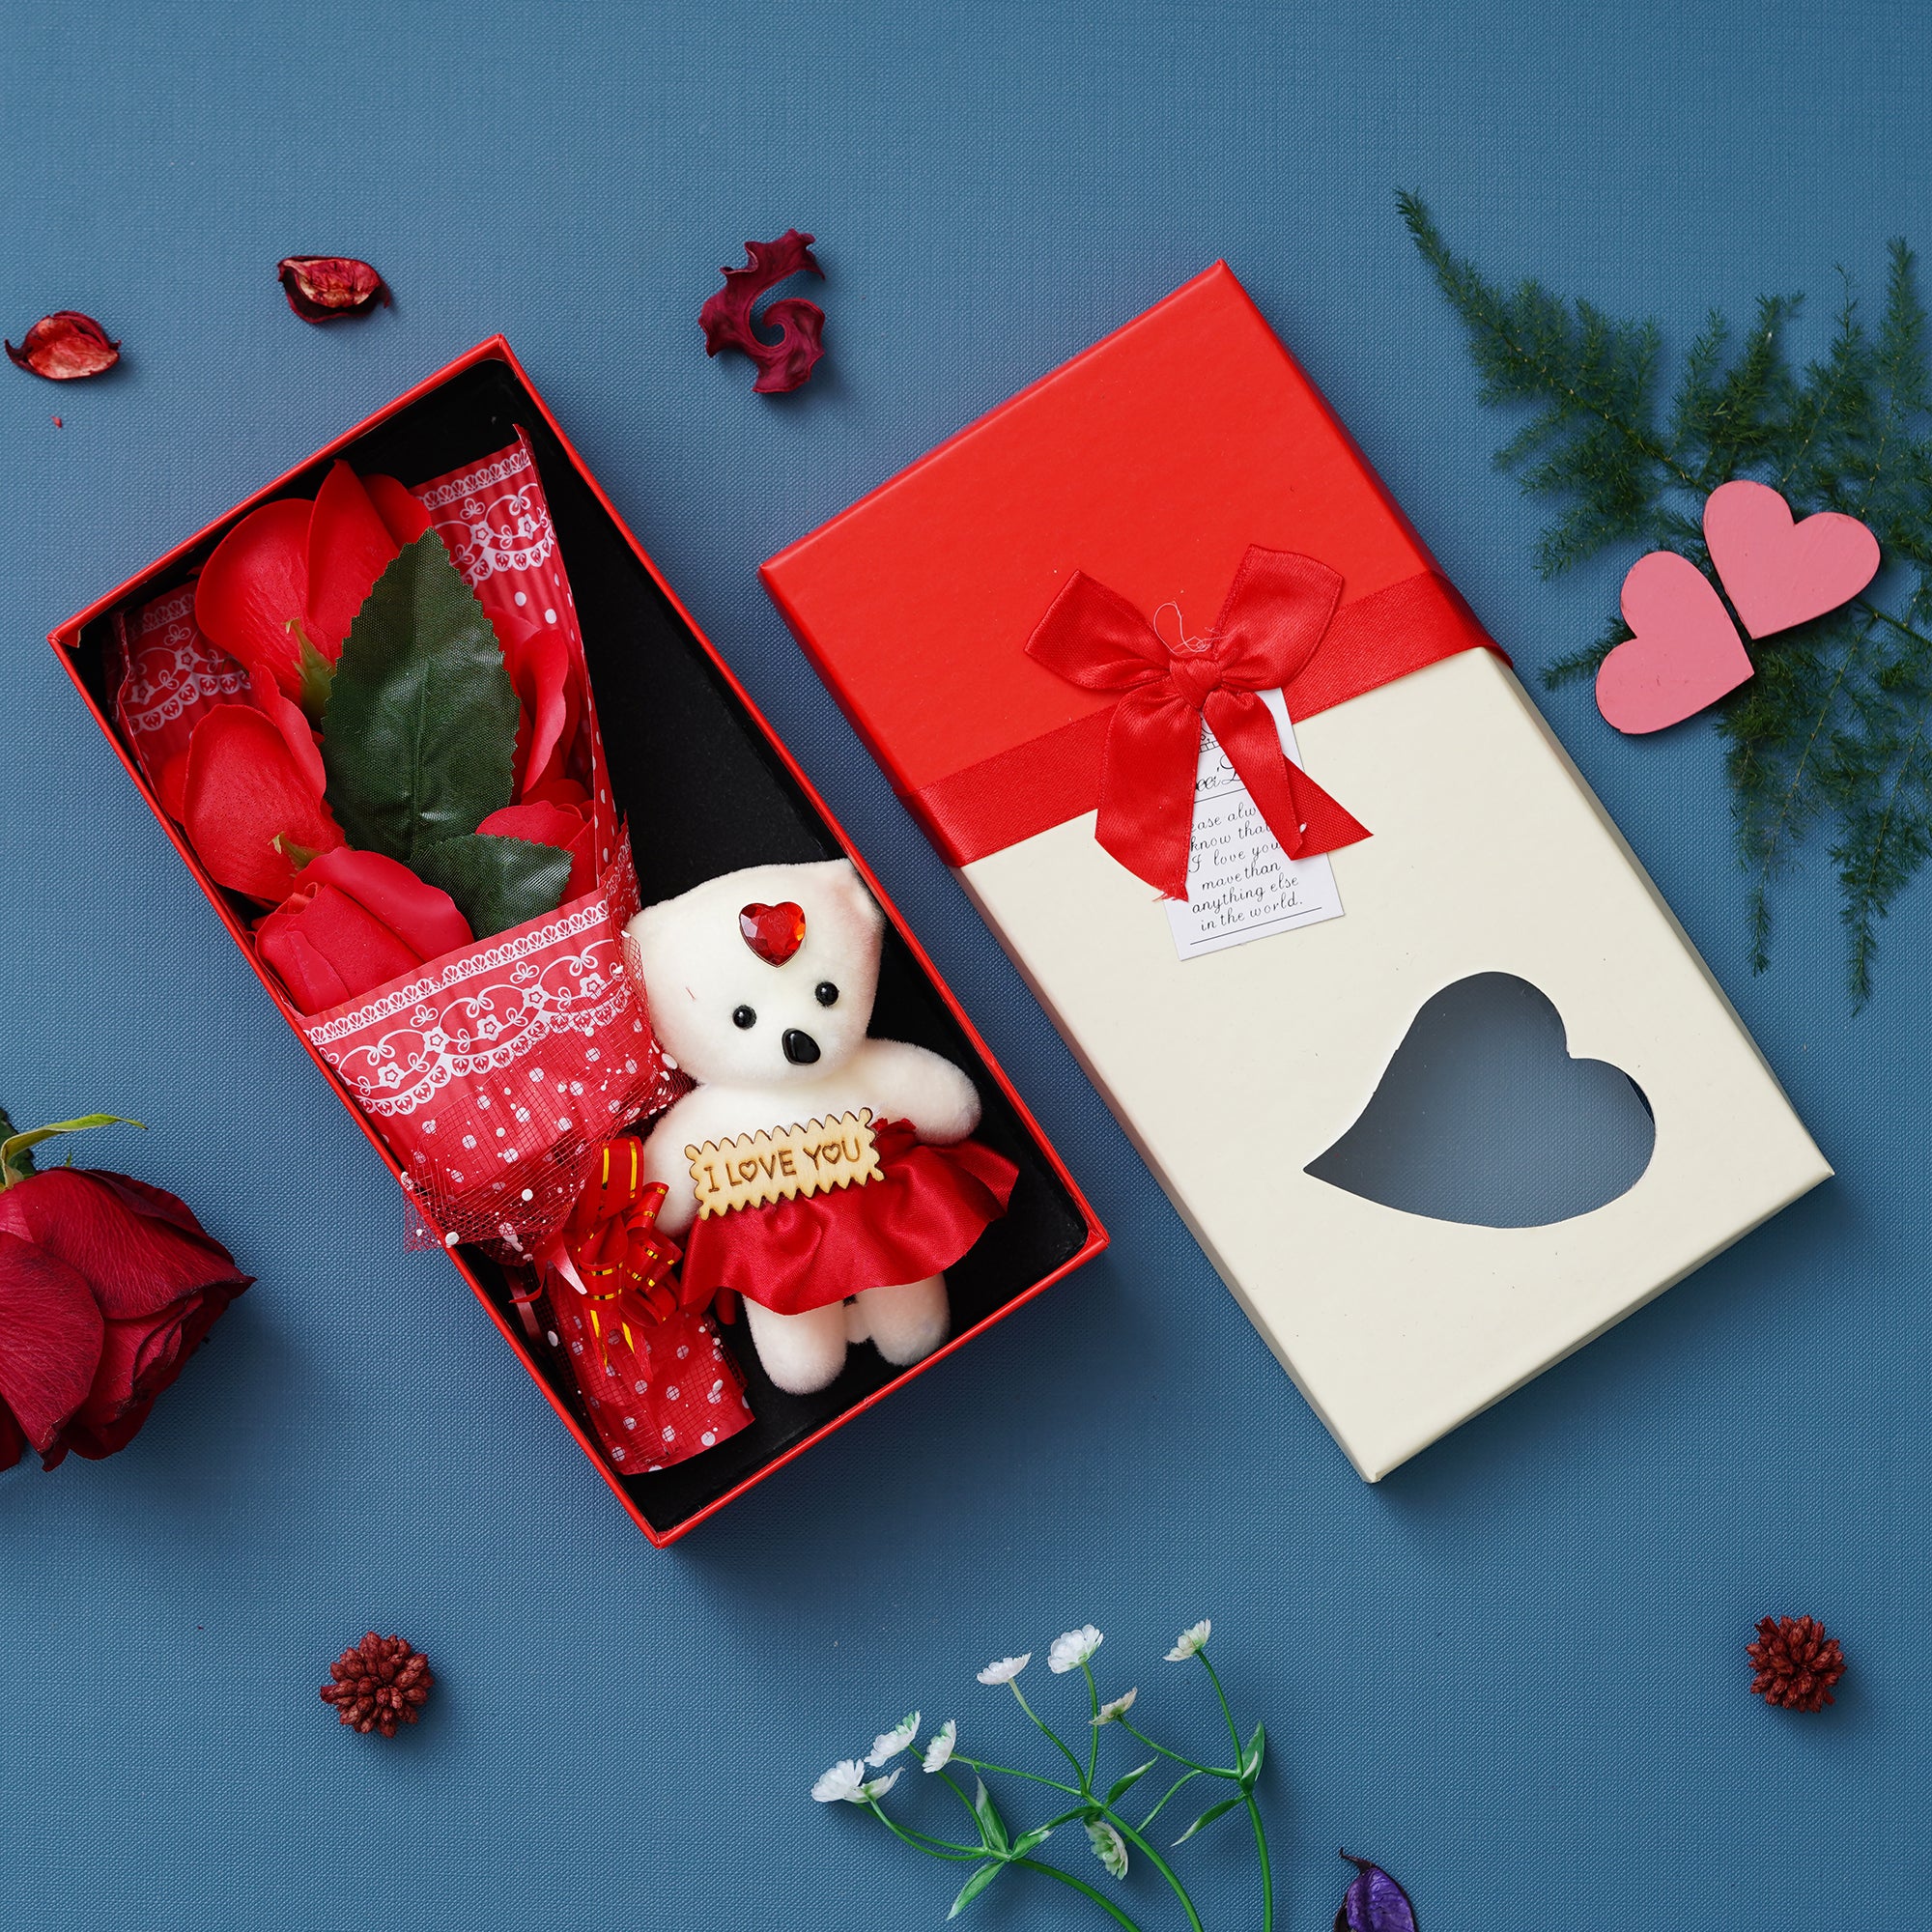 Valentine Combo of Pack of 12 Love Coupons Gift Cards Set, Red Roses Bouquet and White, Red Teddy Bear Valentine's Rectangle Shaped Gift Box, Wooden Box "For You" Message Bottle Set 3